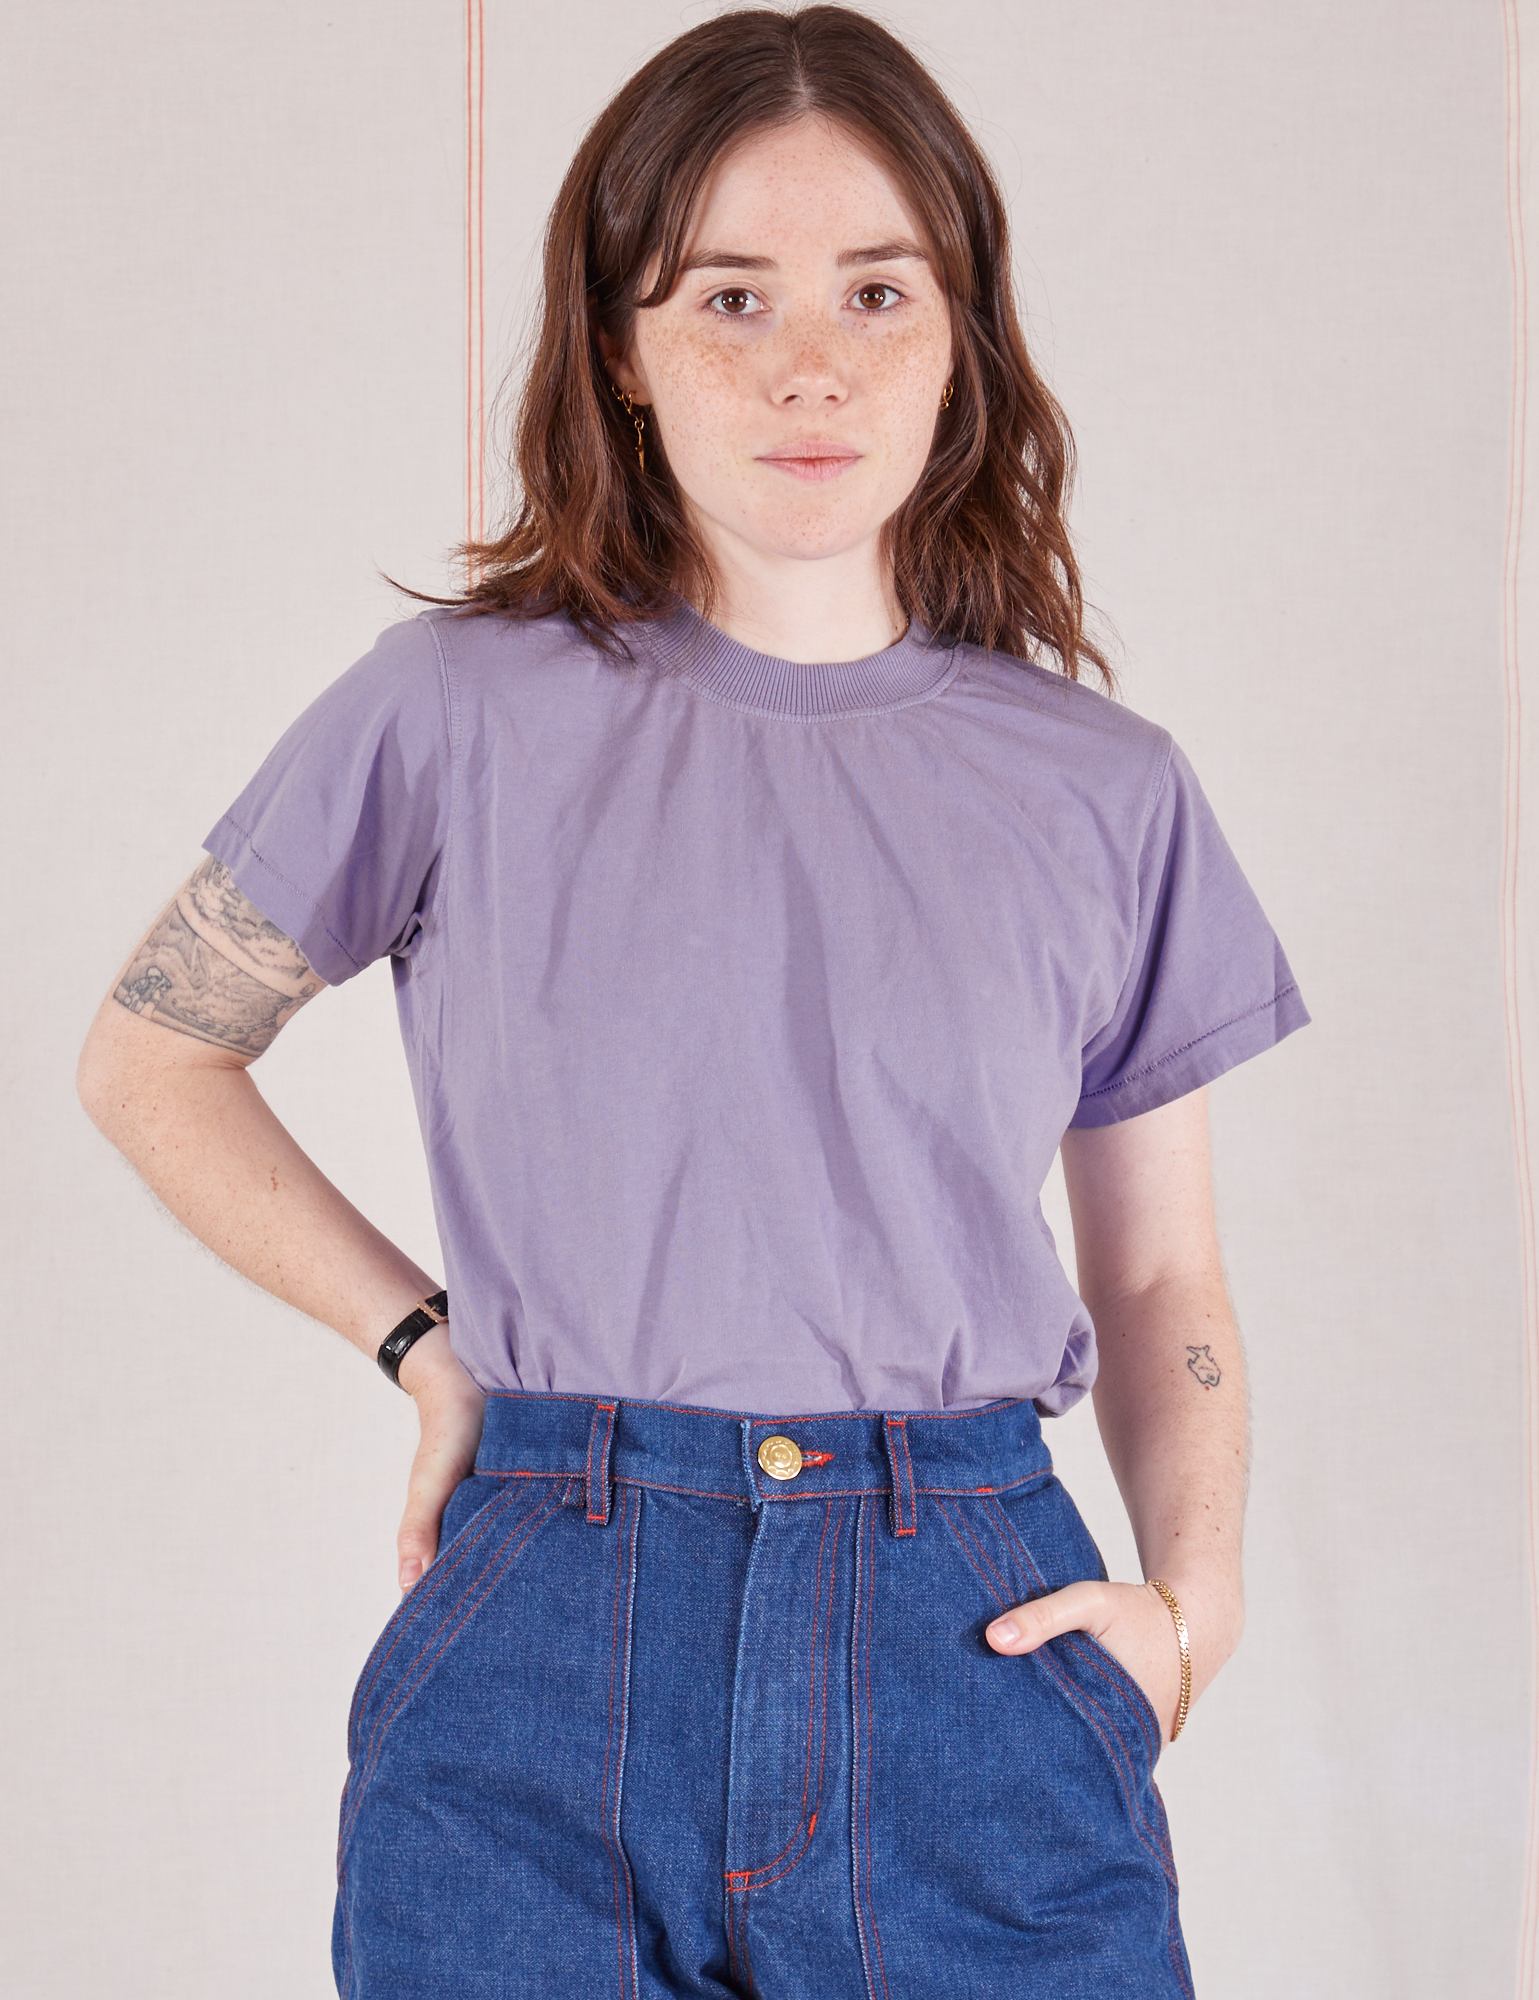 Hana is 5'3" and wearing P Organic Vintage Tee in Faded Grape tucked into dark wash Carpenter Jeans